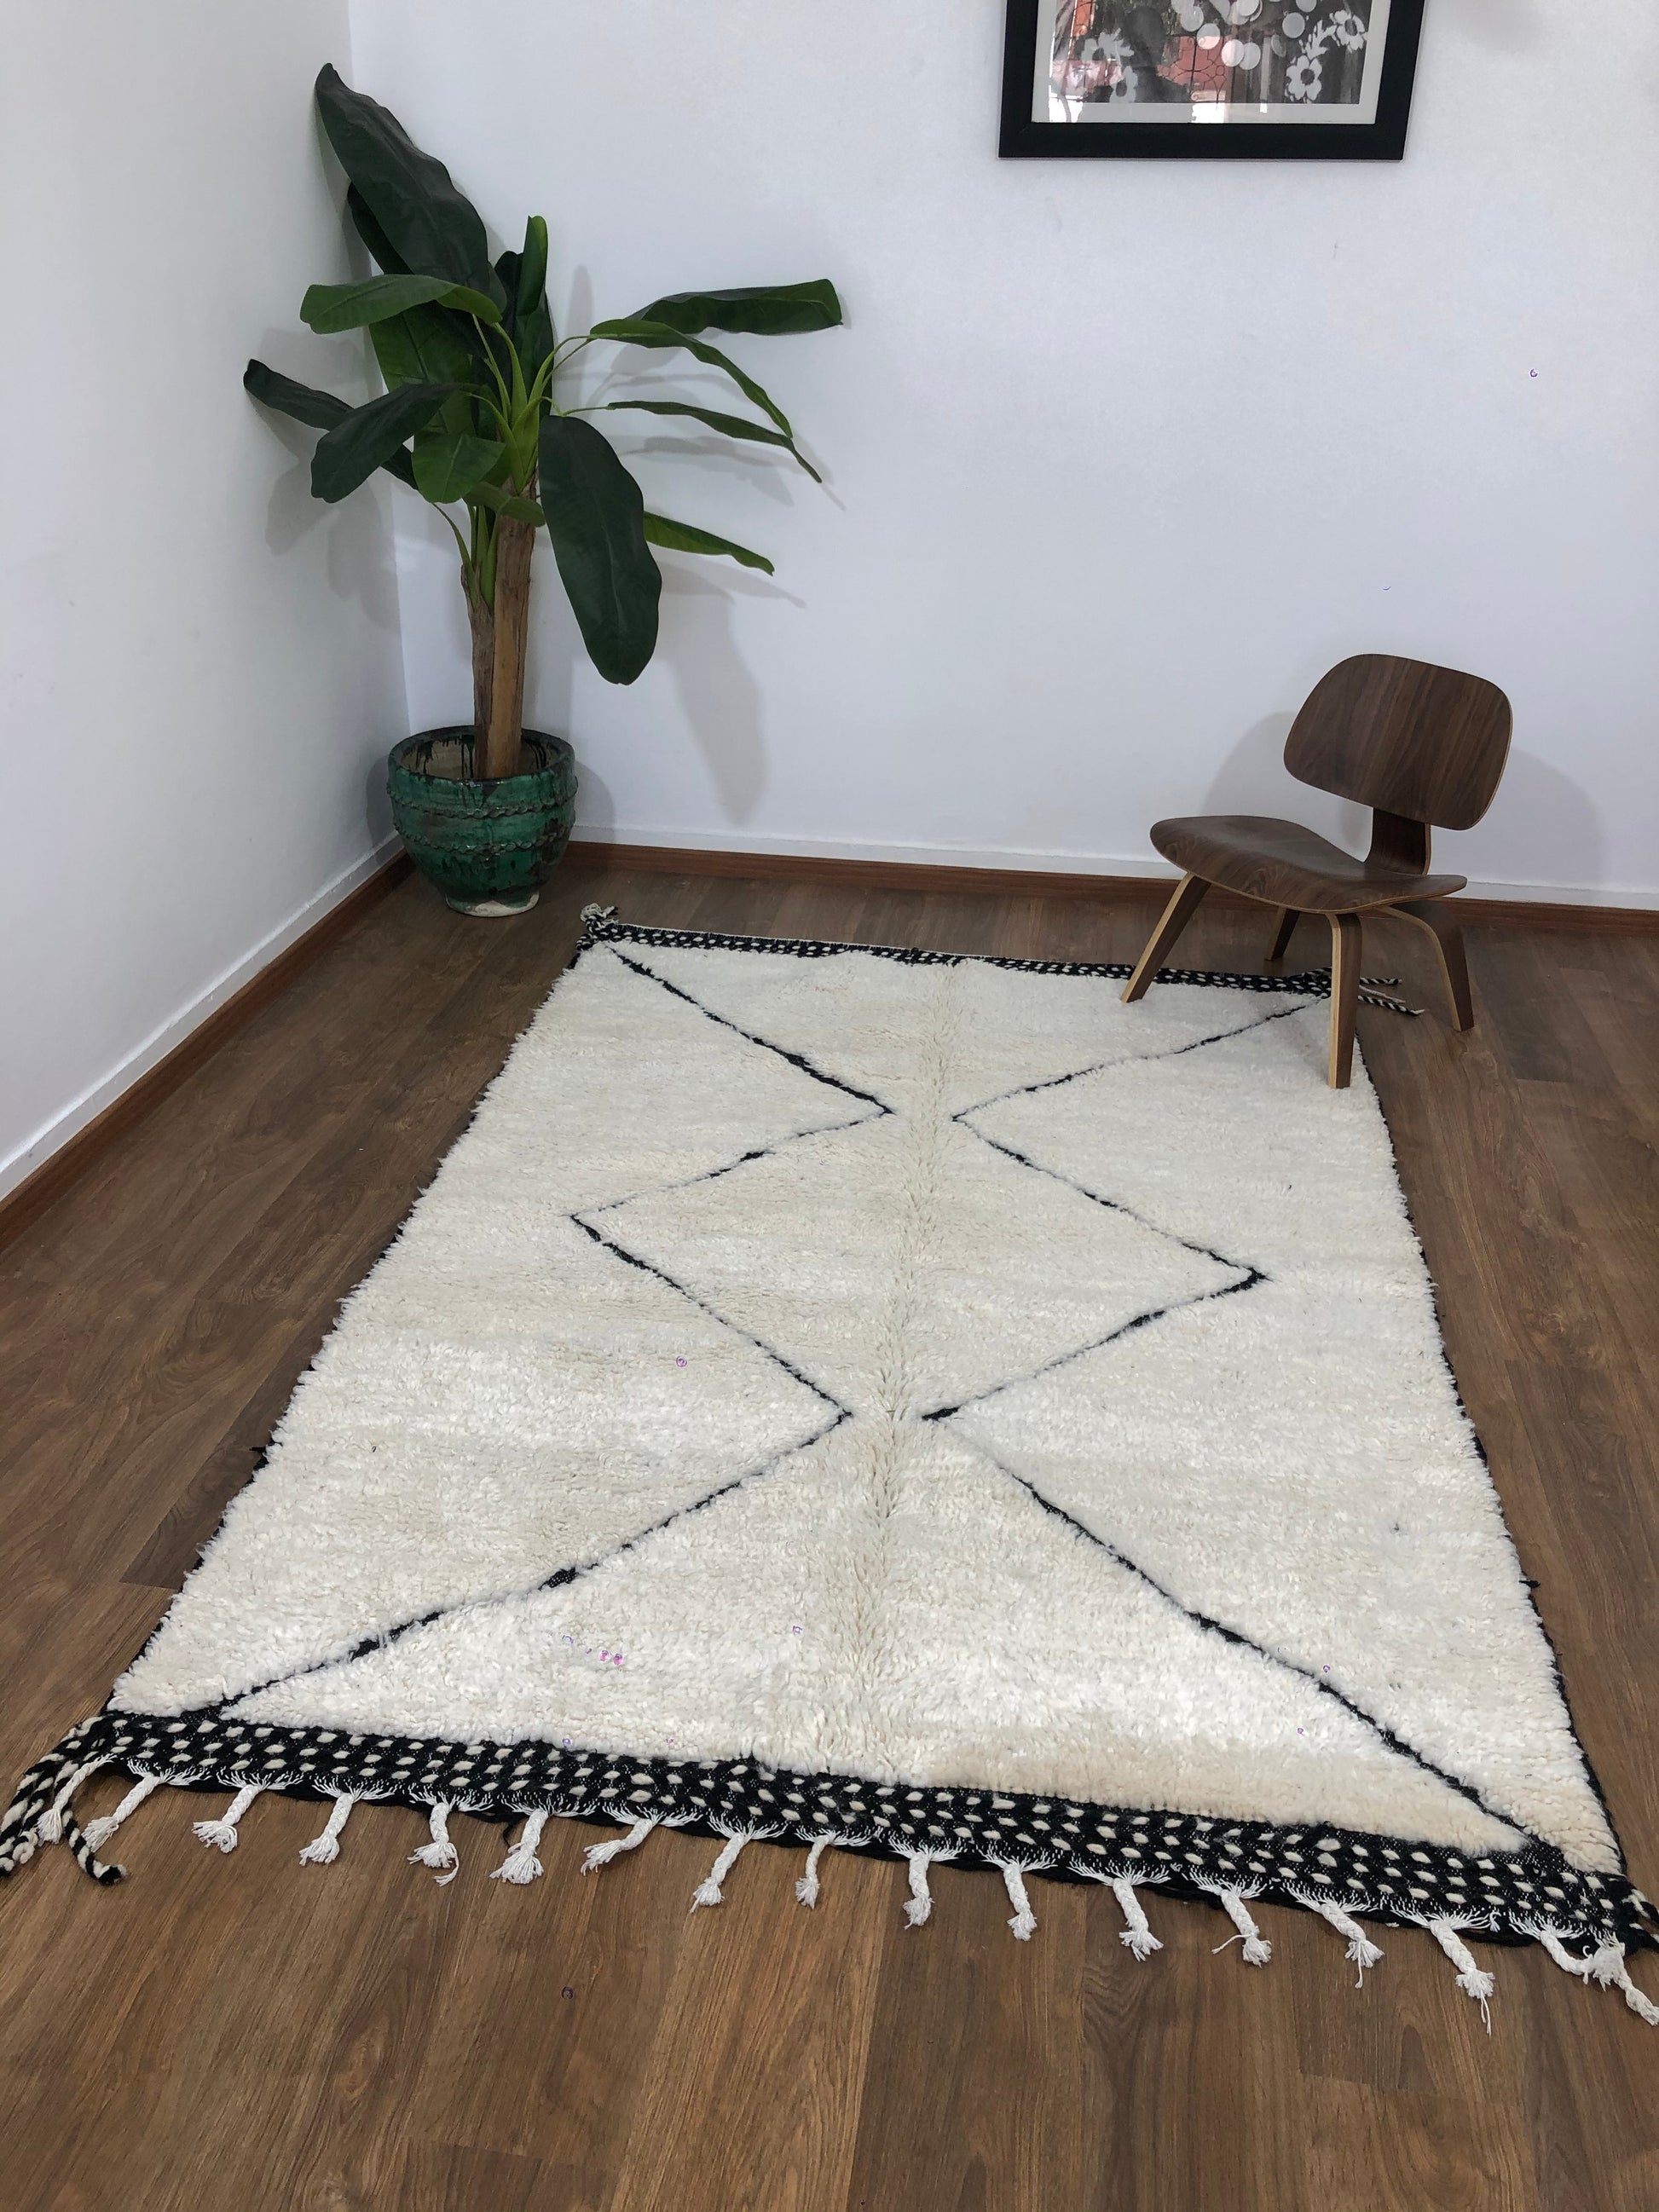 Handmade Moroccan Berber Beni Ourain Rug - 7.84 x 5.28 FT ( 239 x 161 Cm ) Authentic handwoven double sided carpet , Free Shipping - MarrakeshLoom